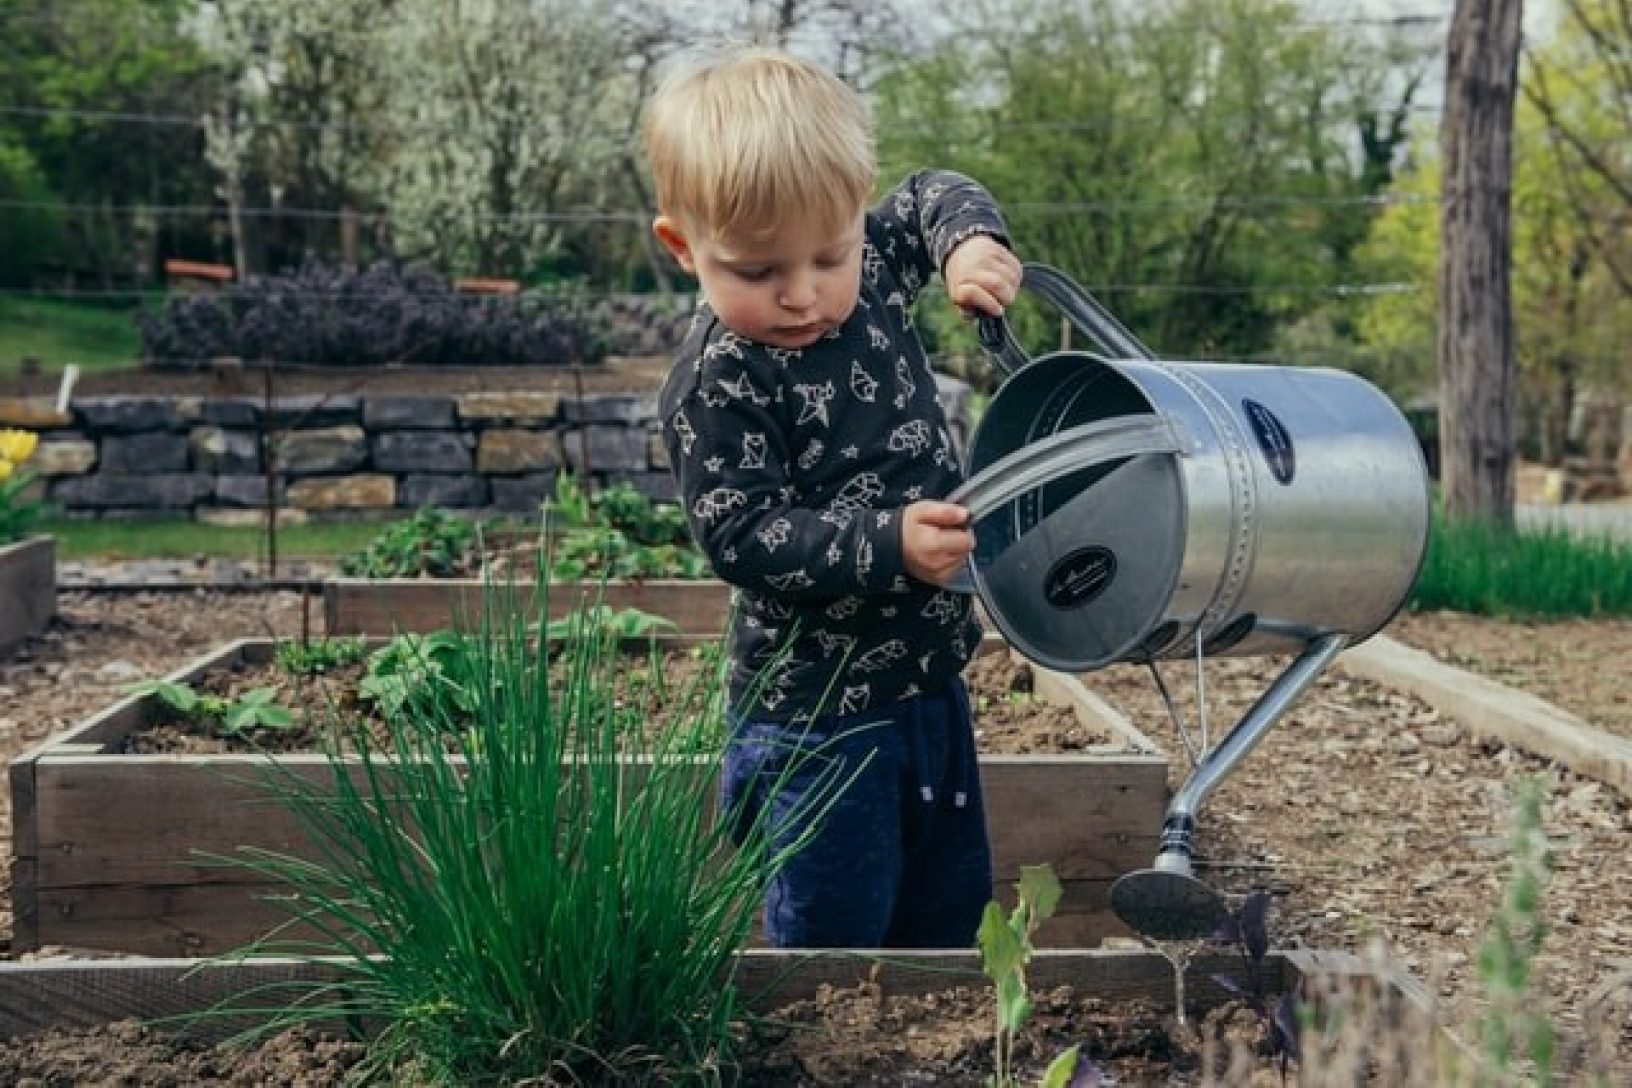 A young boy helps water plants in a wooden raised bed